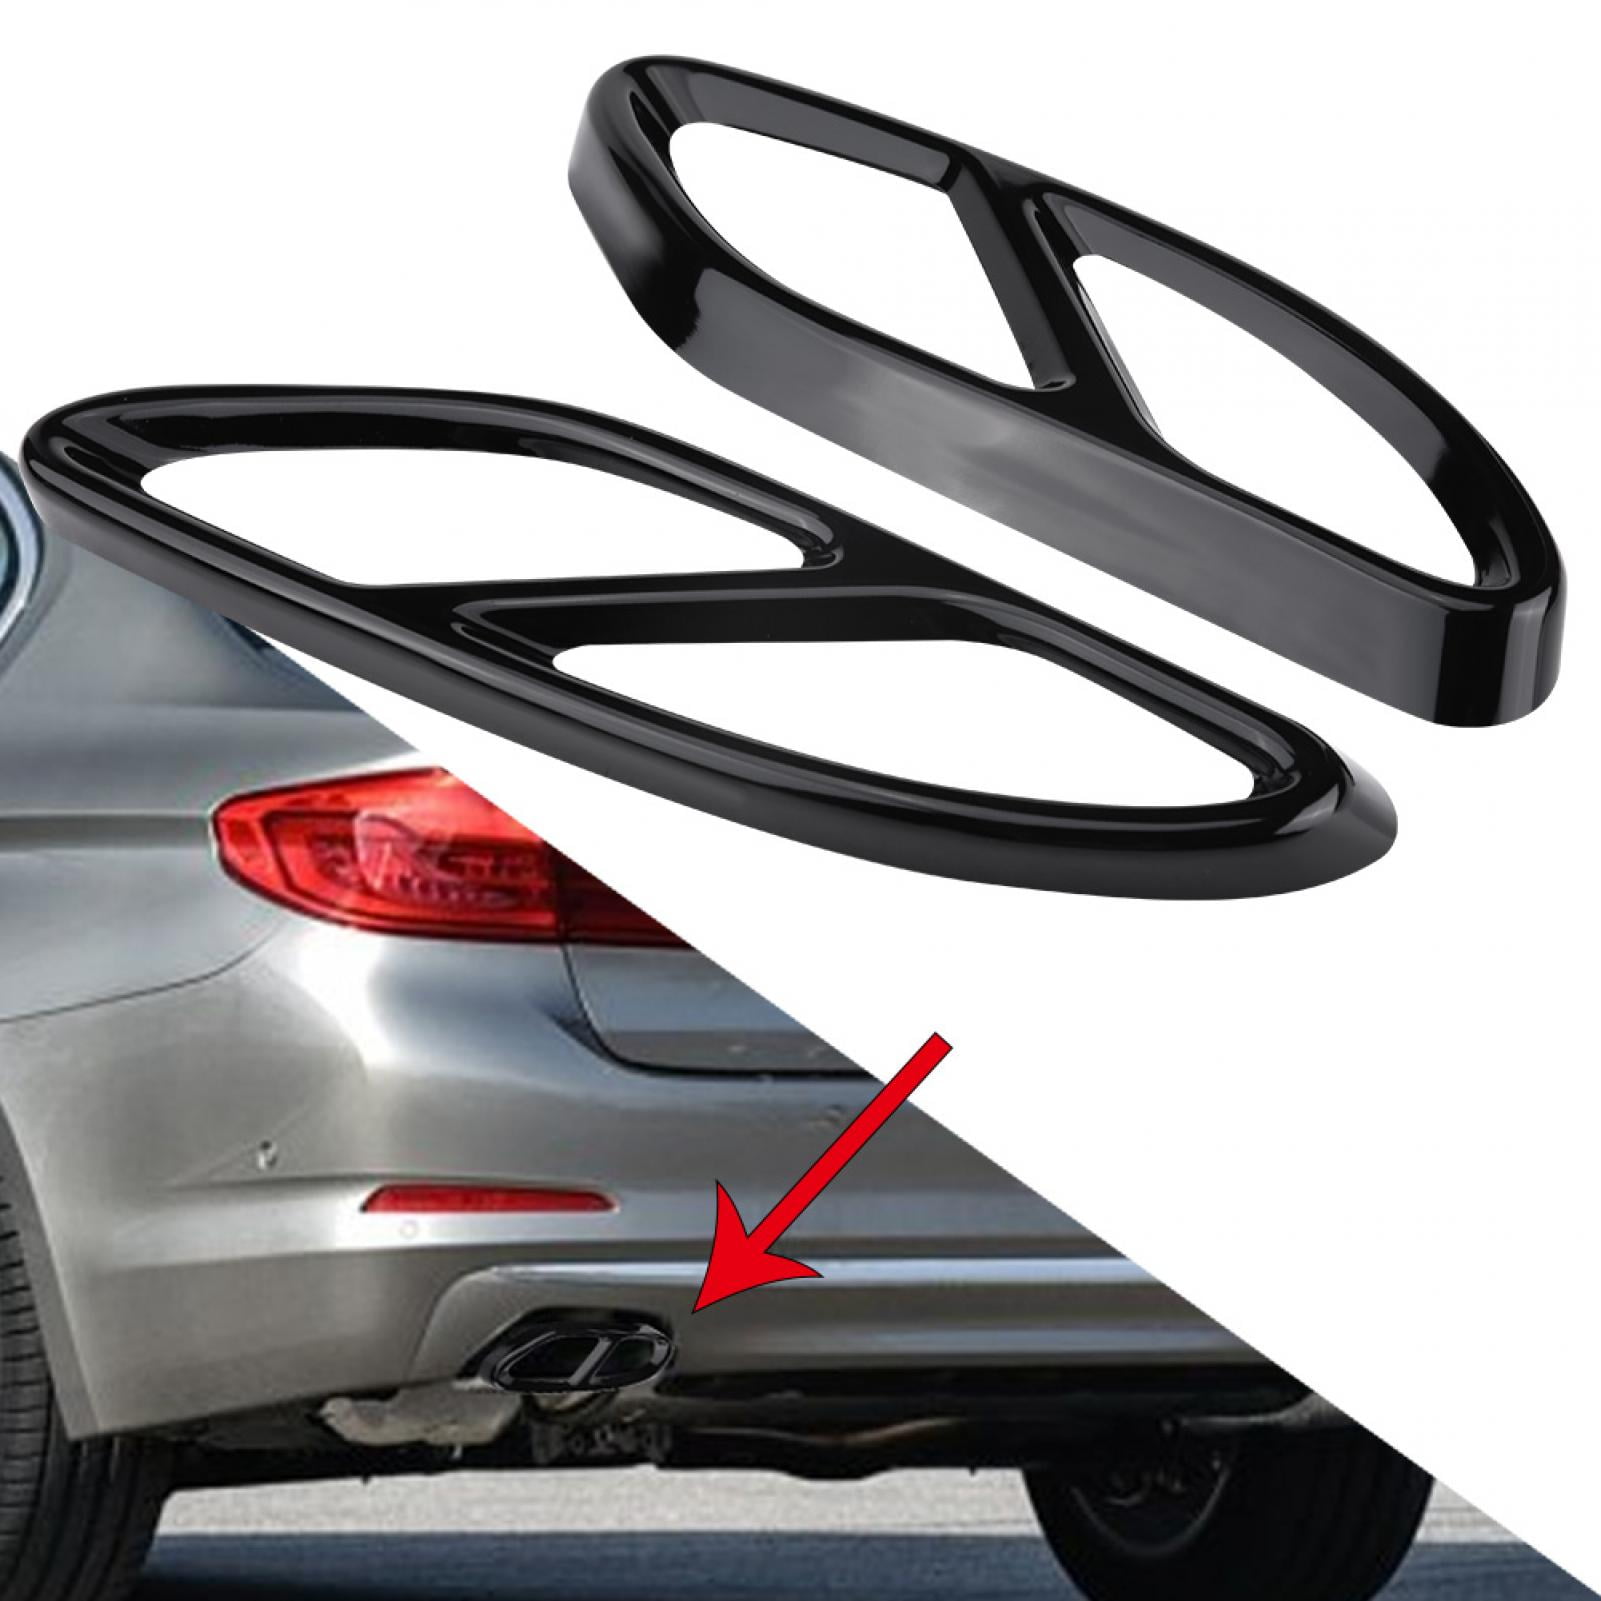 Exhaust Tail Pipe Cover 1 Pair Exhaust Muffler Tail Pipe Cover Trims for Mercedes for Benz GLC C E-Class C207 Coupe 14-17 Silver